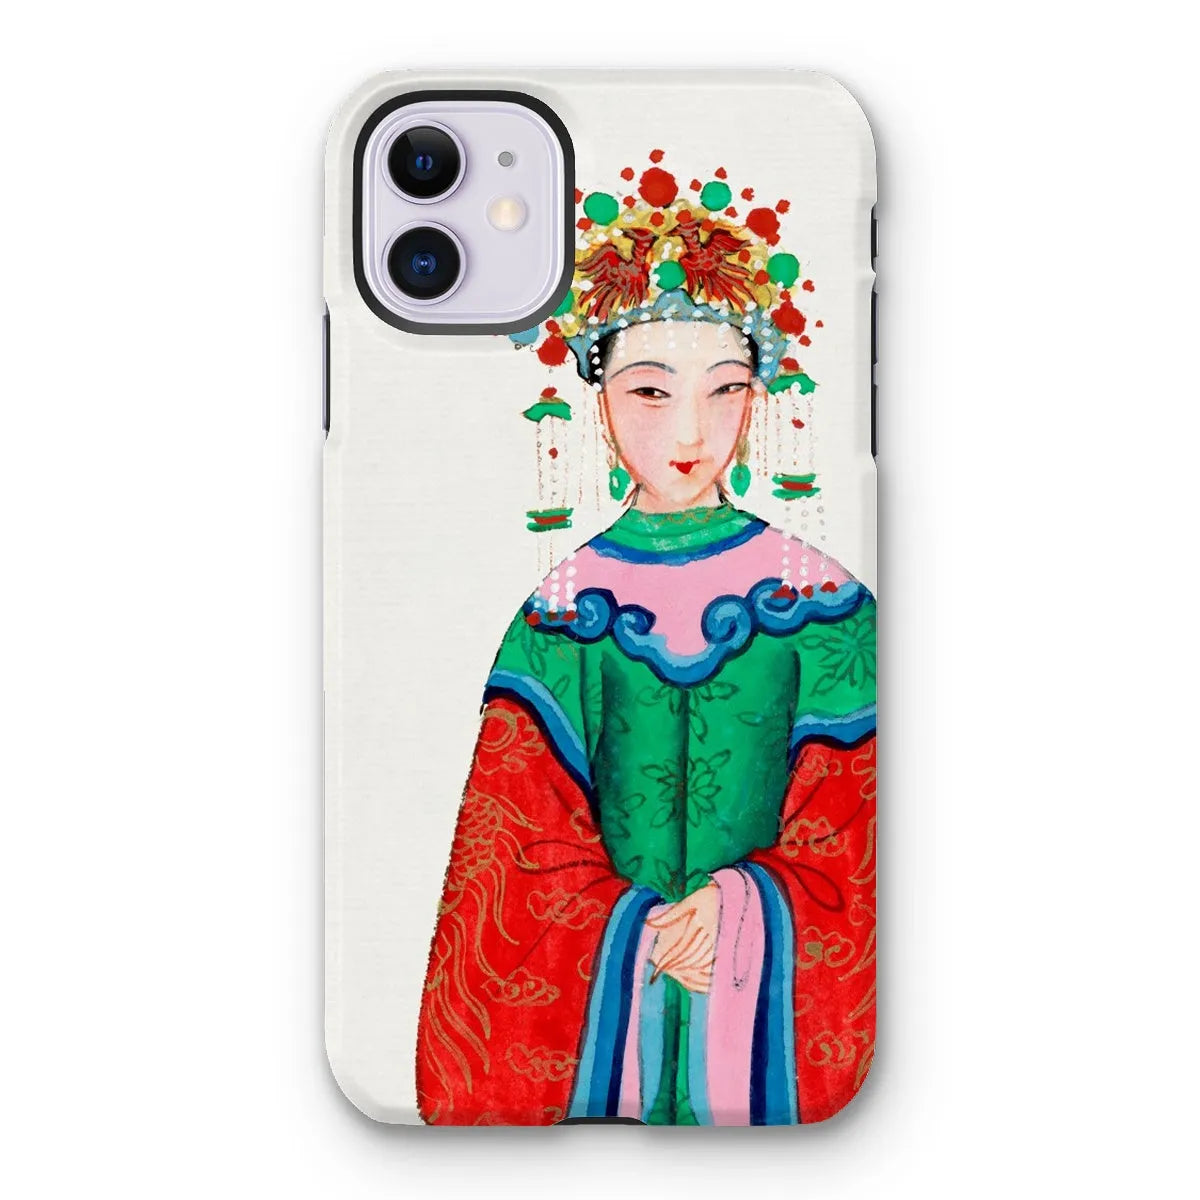 Imperial Princess - Chinese Aesthetic Painting Phone Case - Iphone 11 / Matte - Mobile Phone Cases - Aesthetic Art